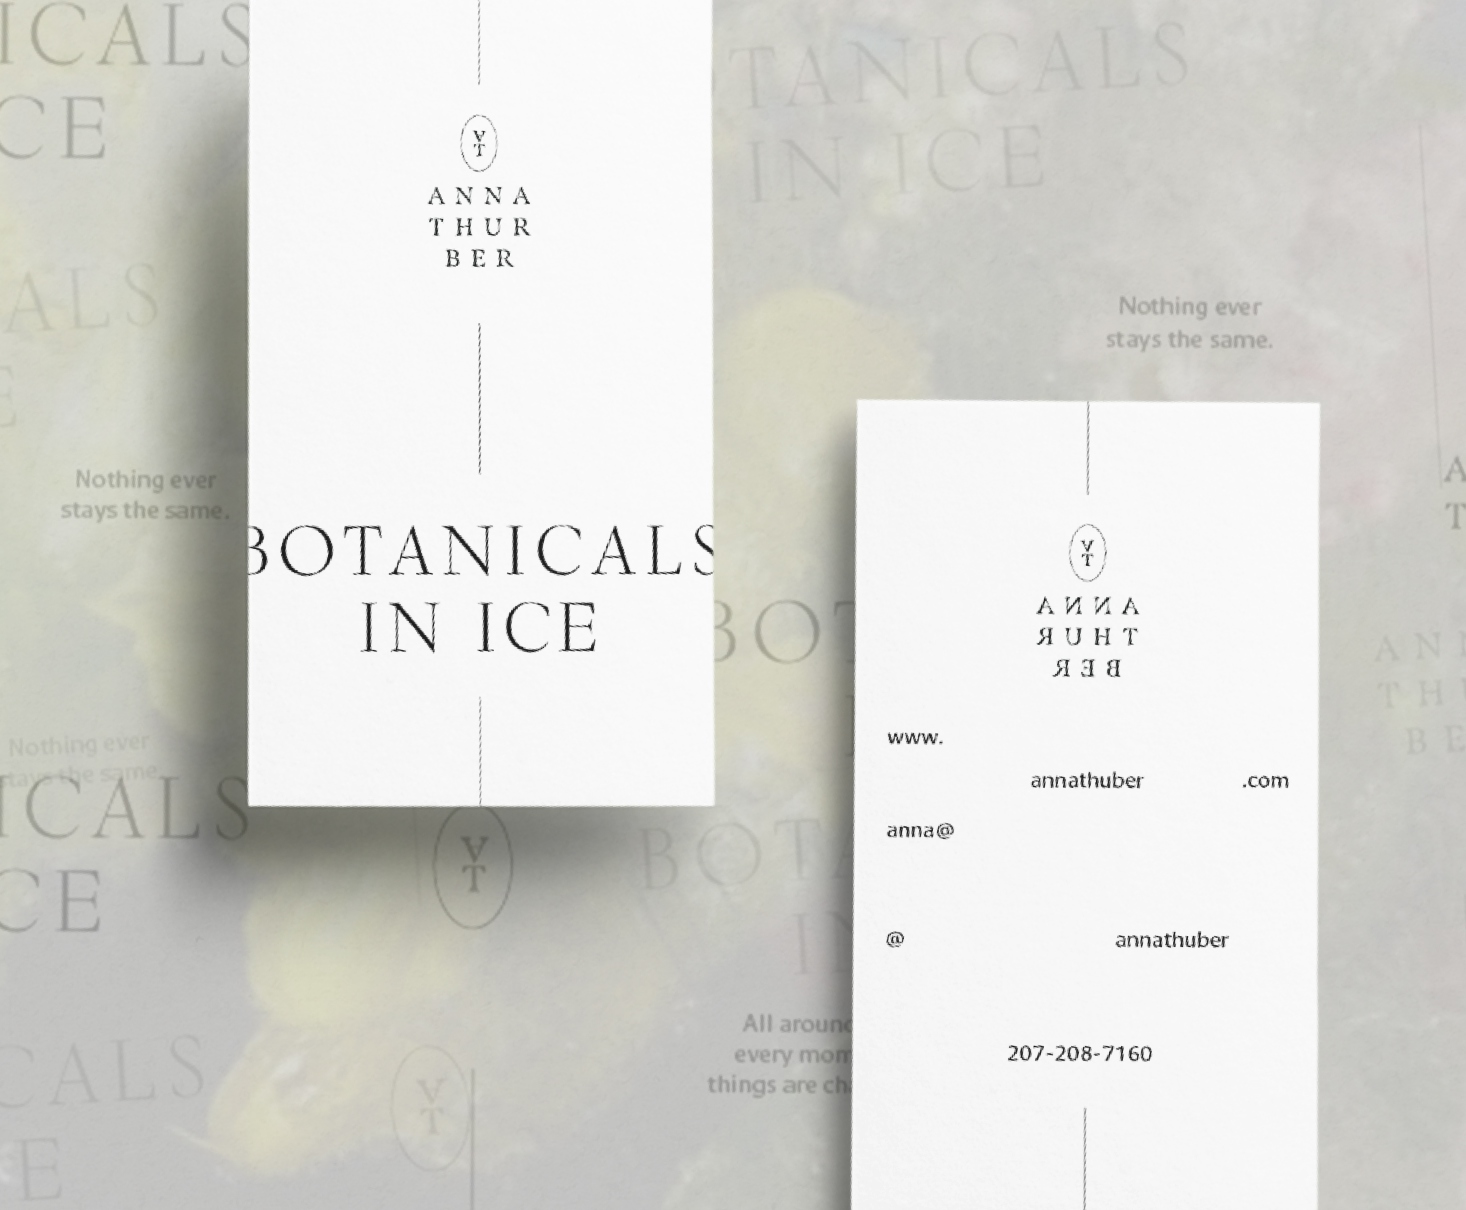 Two leaflets for “Botanicals in ice”